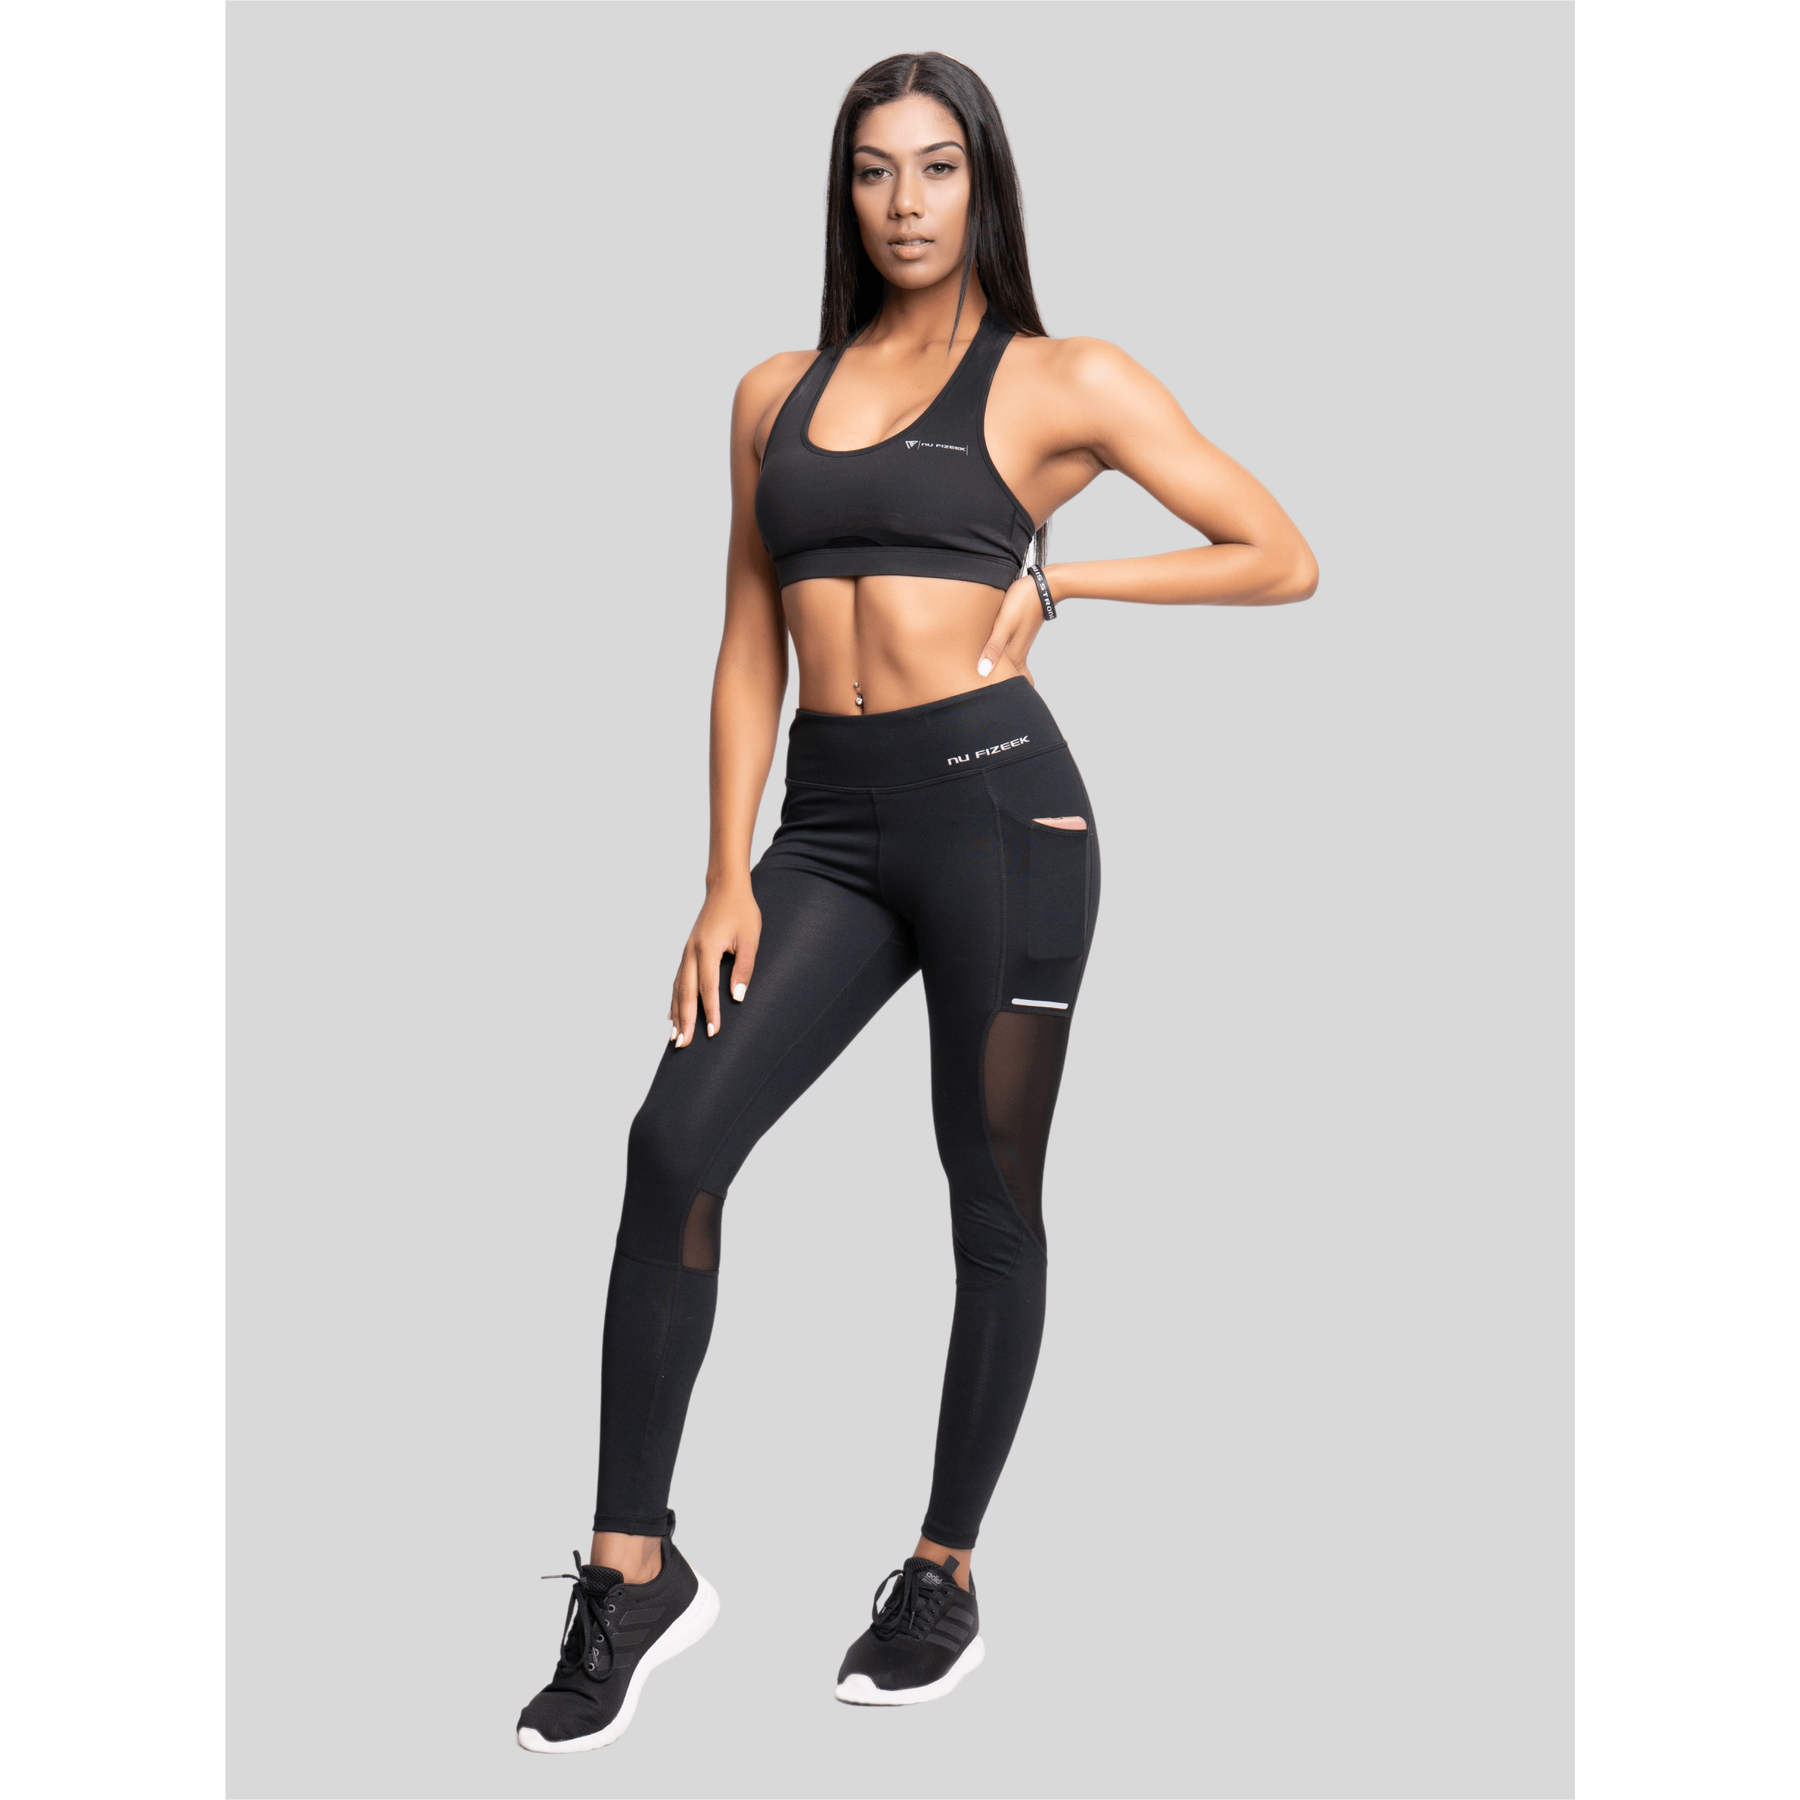 LYCRA® FitSense™ Technology Gives Sports Bras a Boost  Need a sports bra  that's comfy enough for casual wear but supportive enough for the gym? Look  for sports bras made with LYCRA®